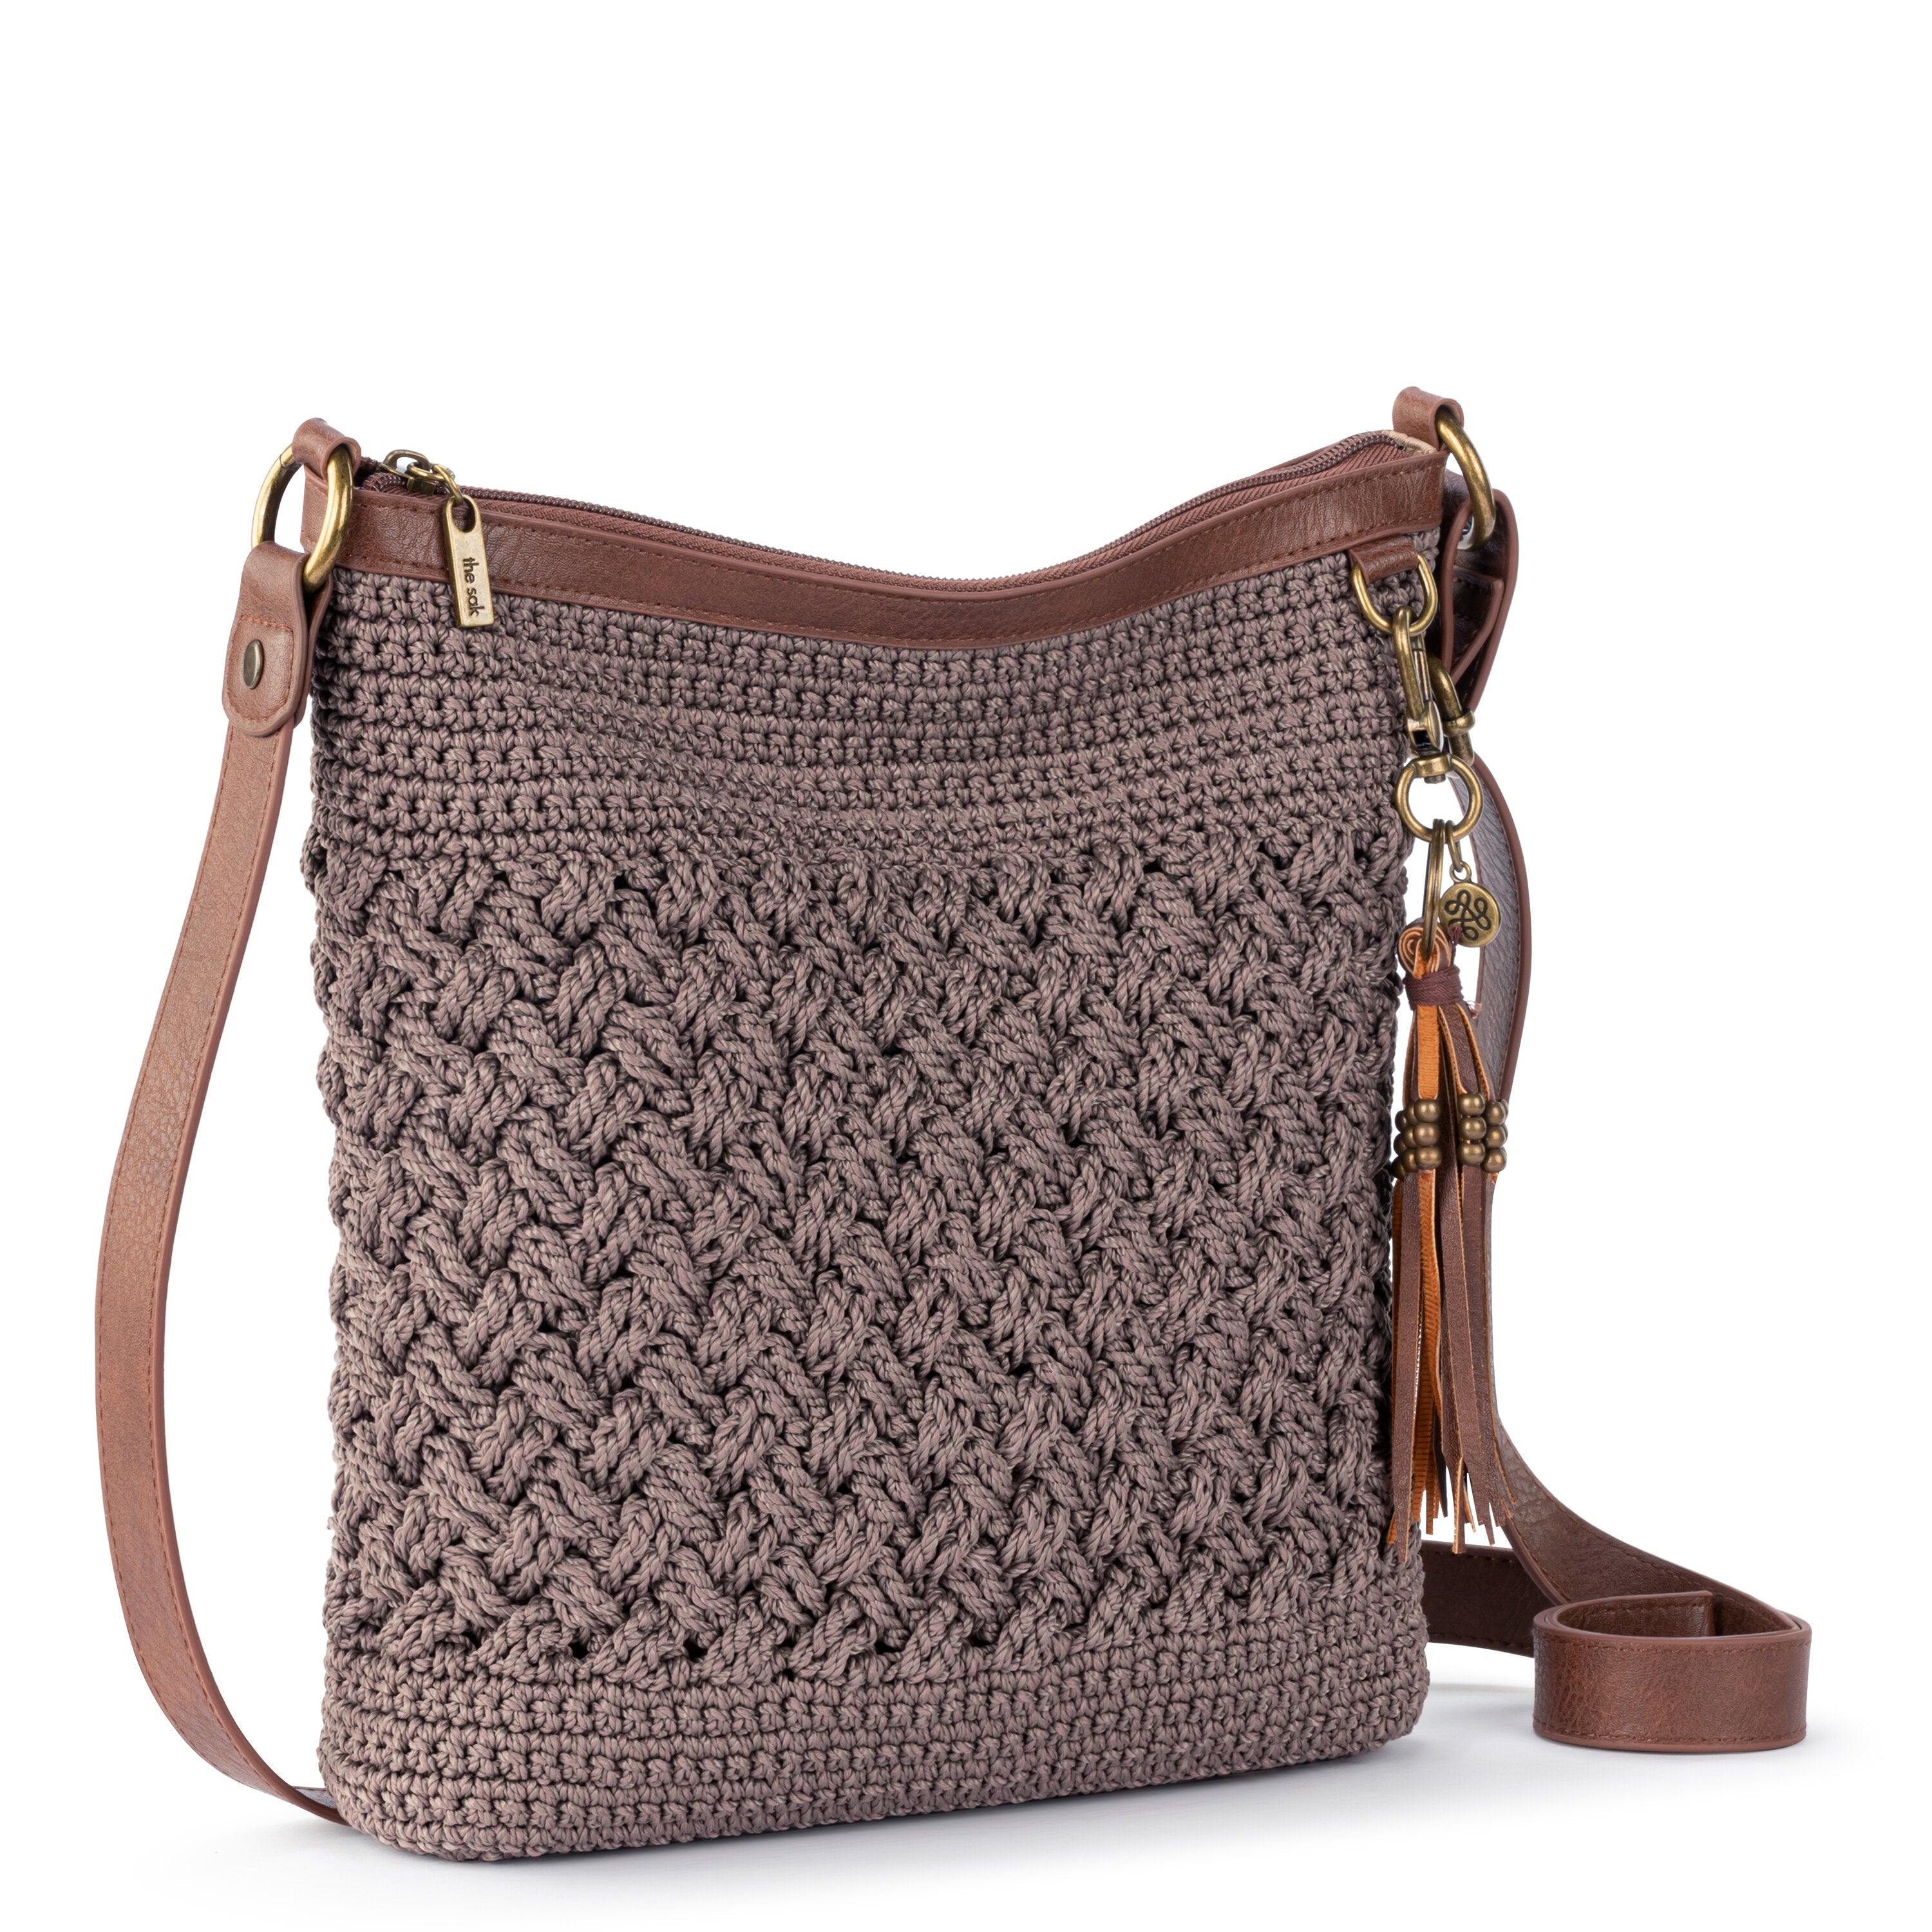 The Sak S Iris Large Smartphone Crossbody Bag In Leather in Natural